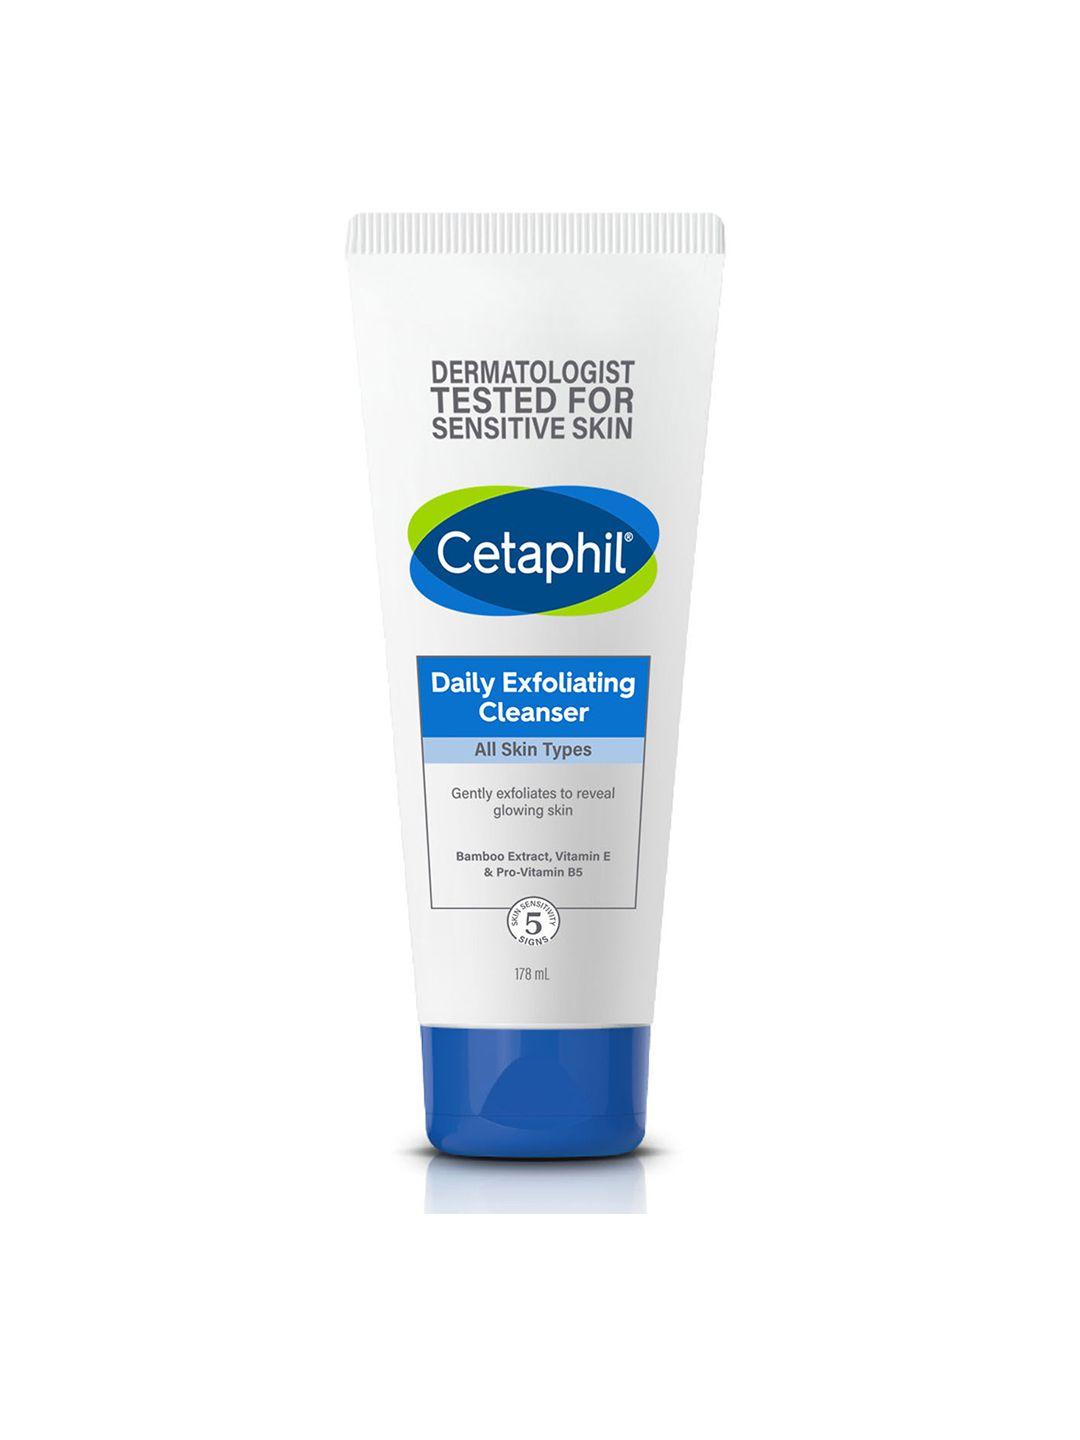 cetaphil-daily-exfloliating-cleanser-with-bamboo-extract-&-vitamin-e---178ml